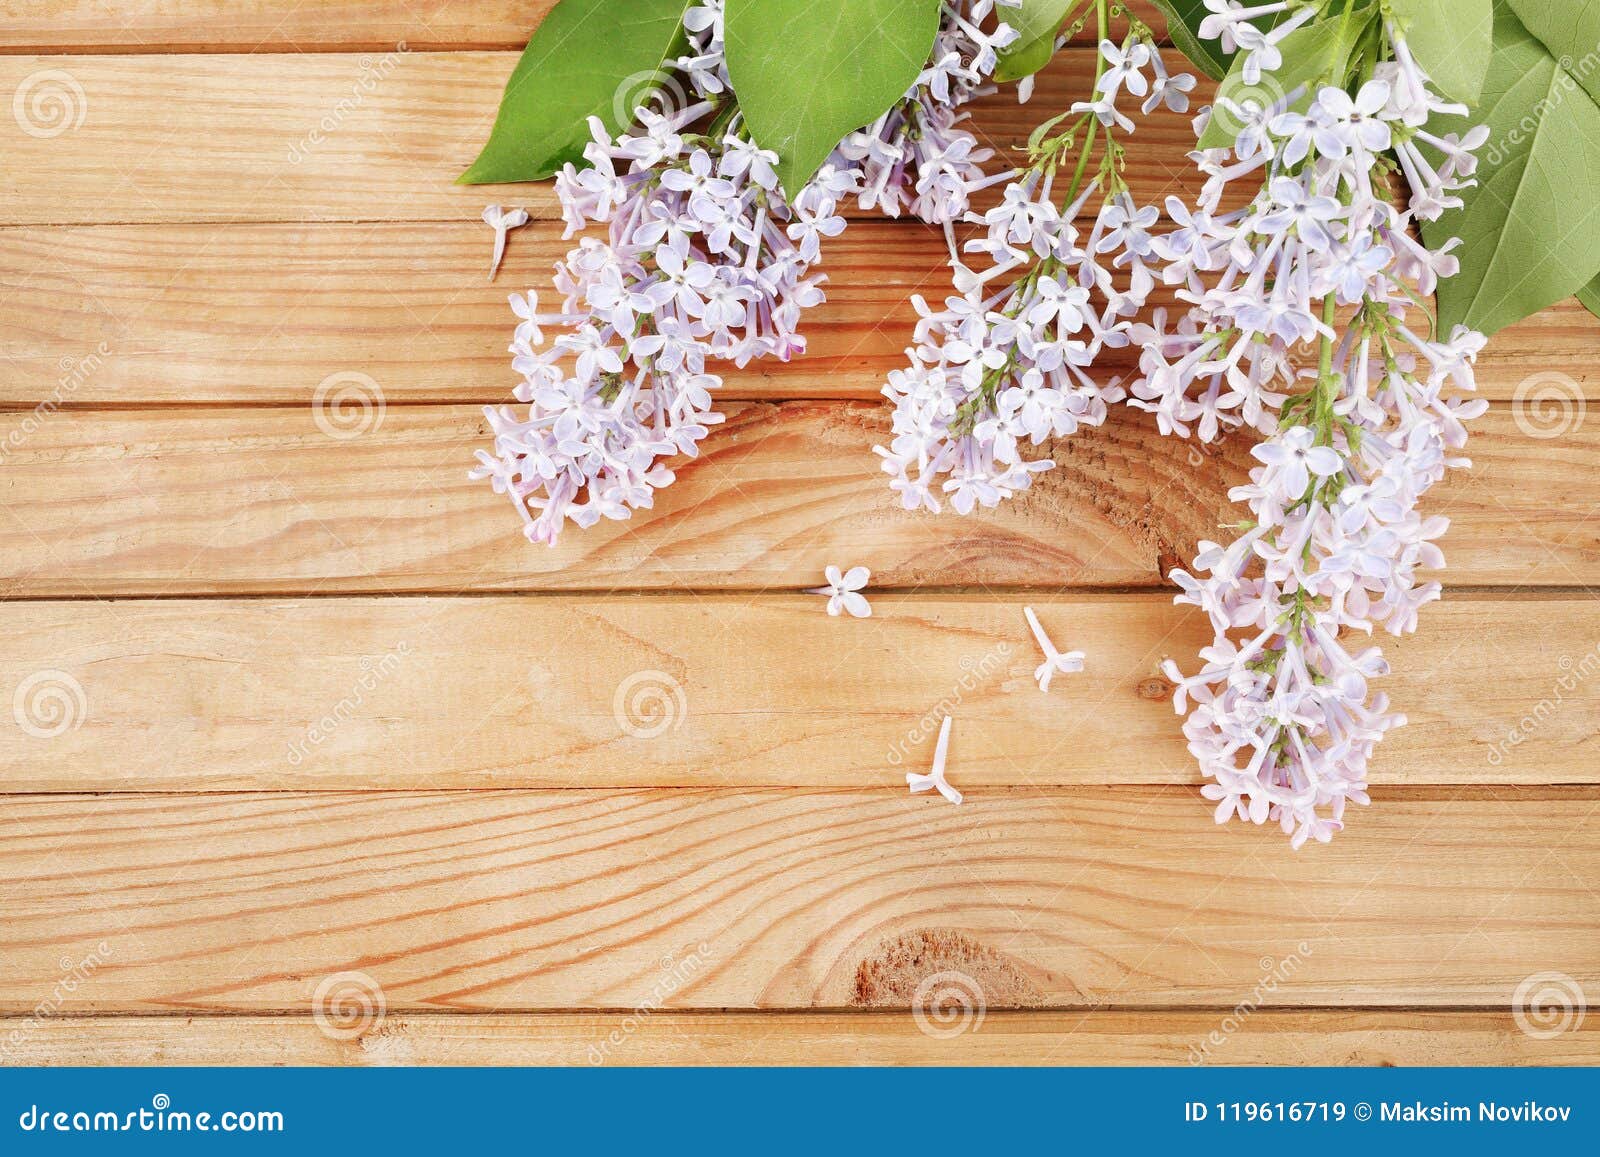 Lilaclilac On A Wooden Background Stock Image Image Of Lilac Images, Photos, Reviews